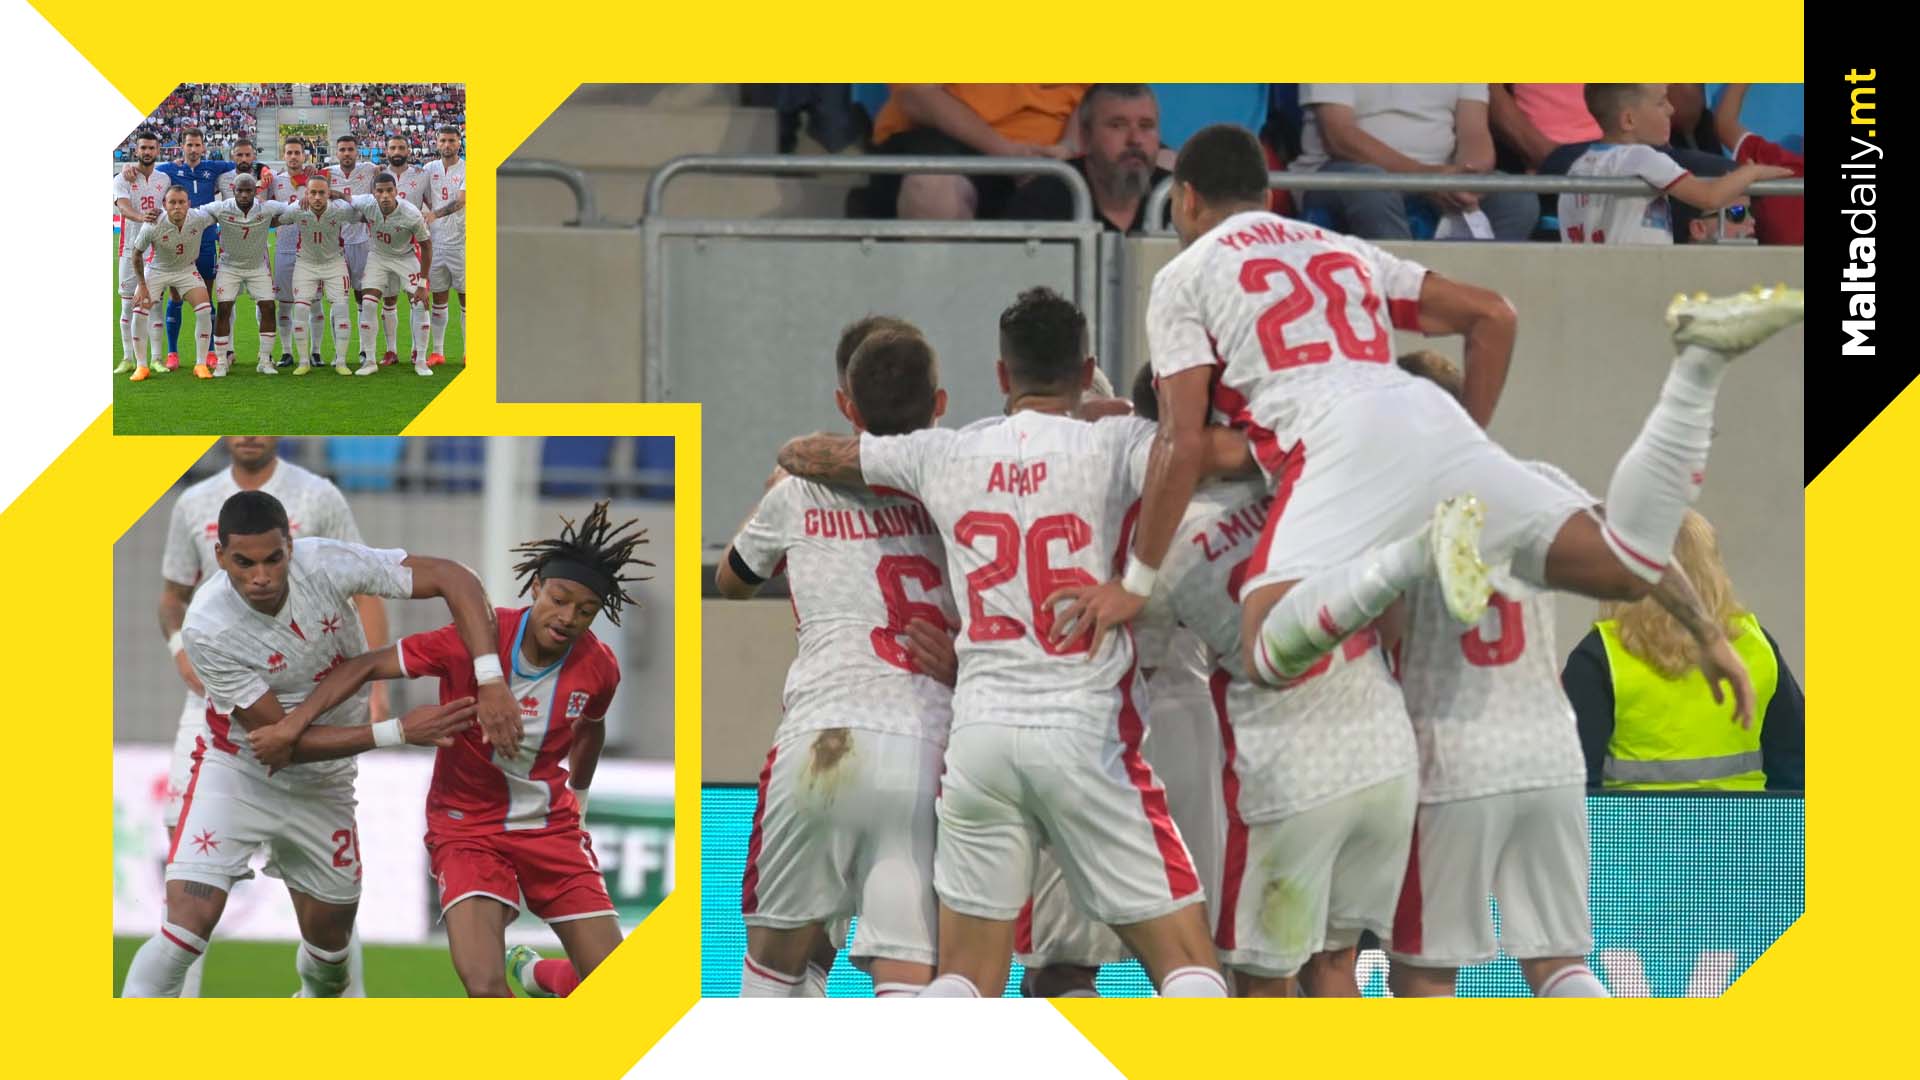 Malta beat Luxembourg with Kyrian Nwoko goal